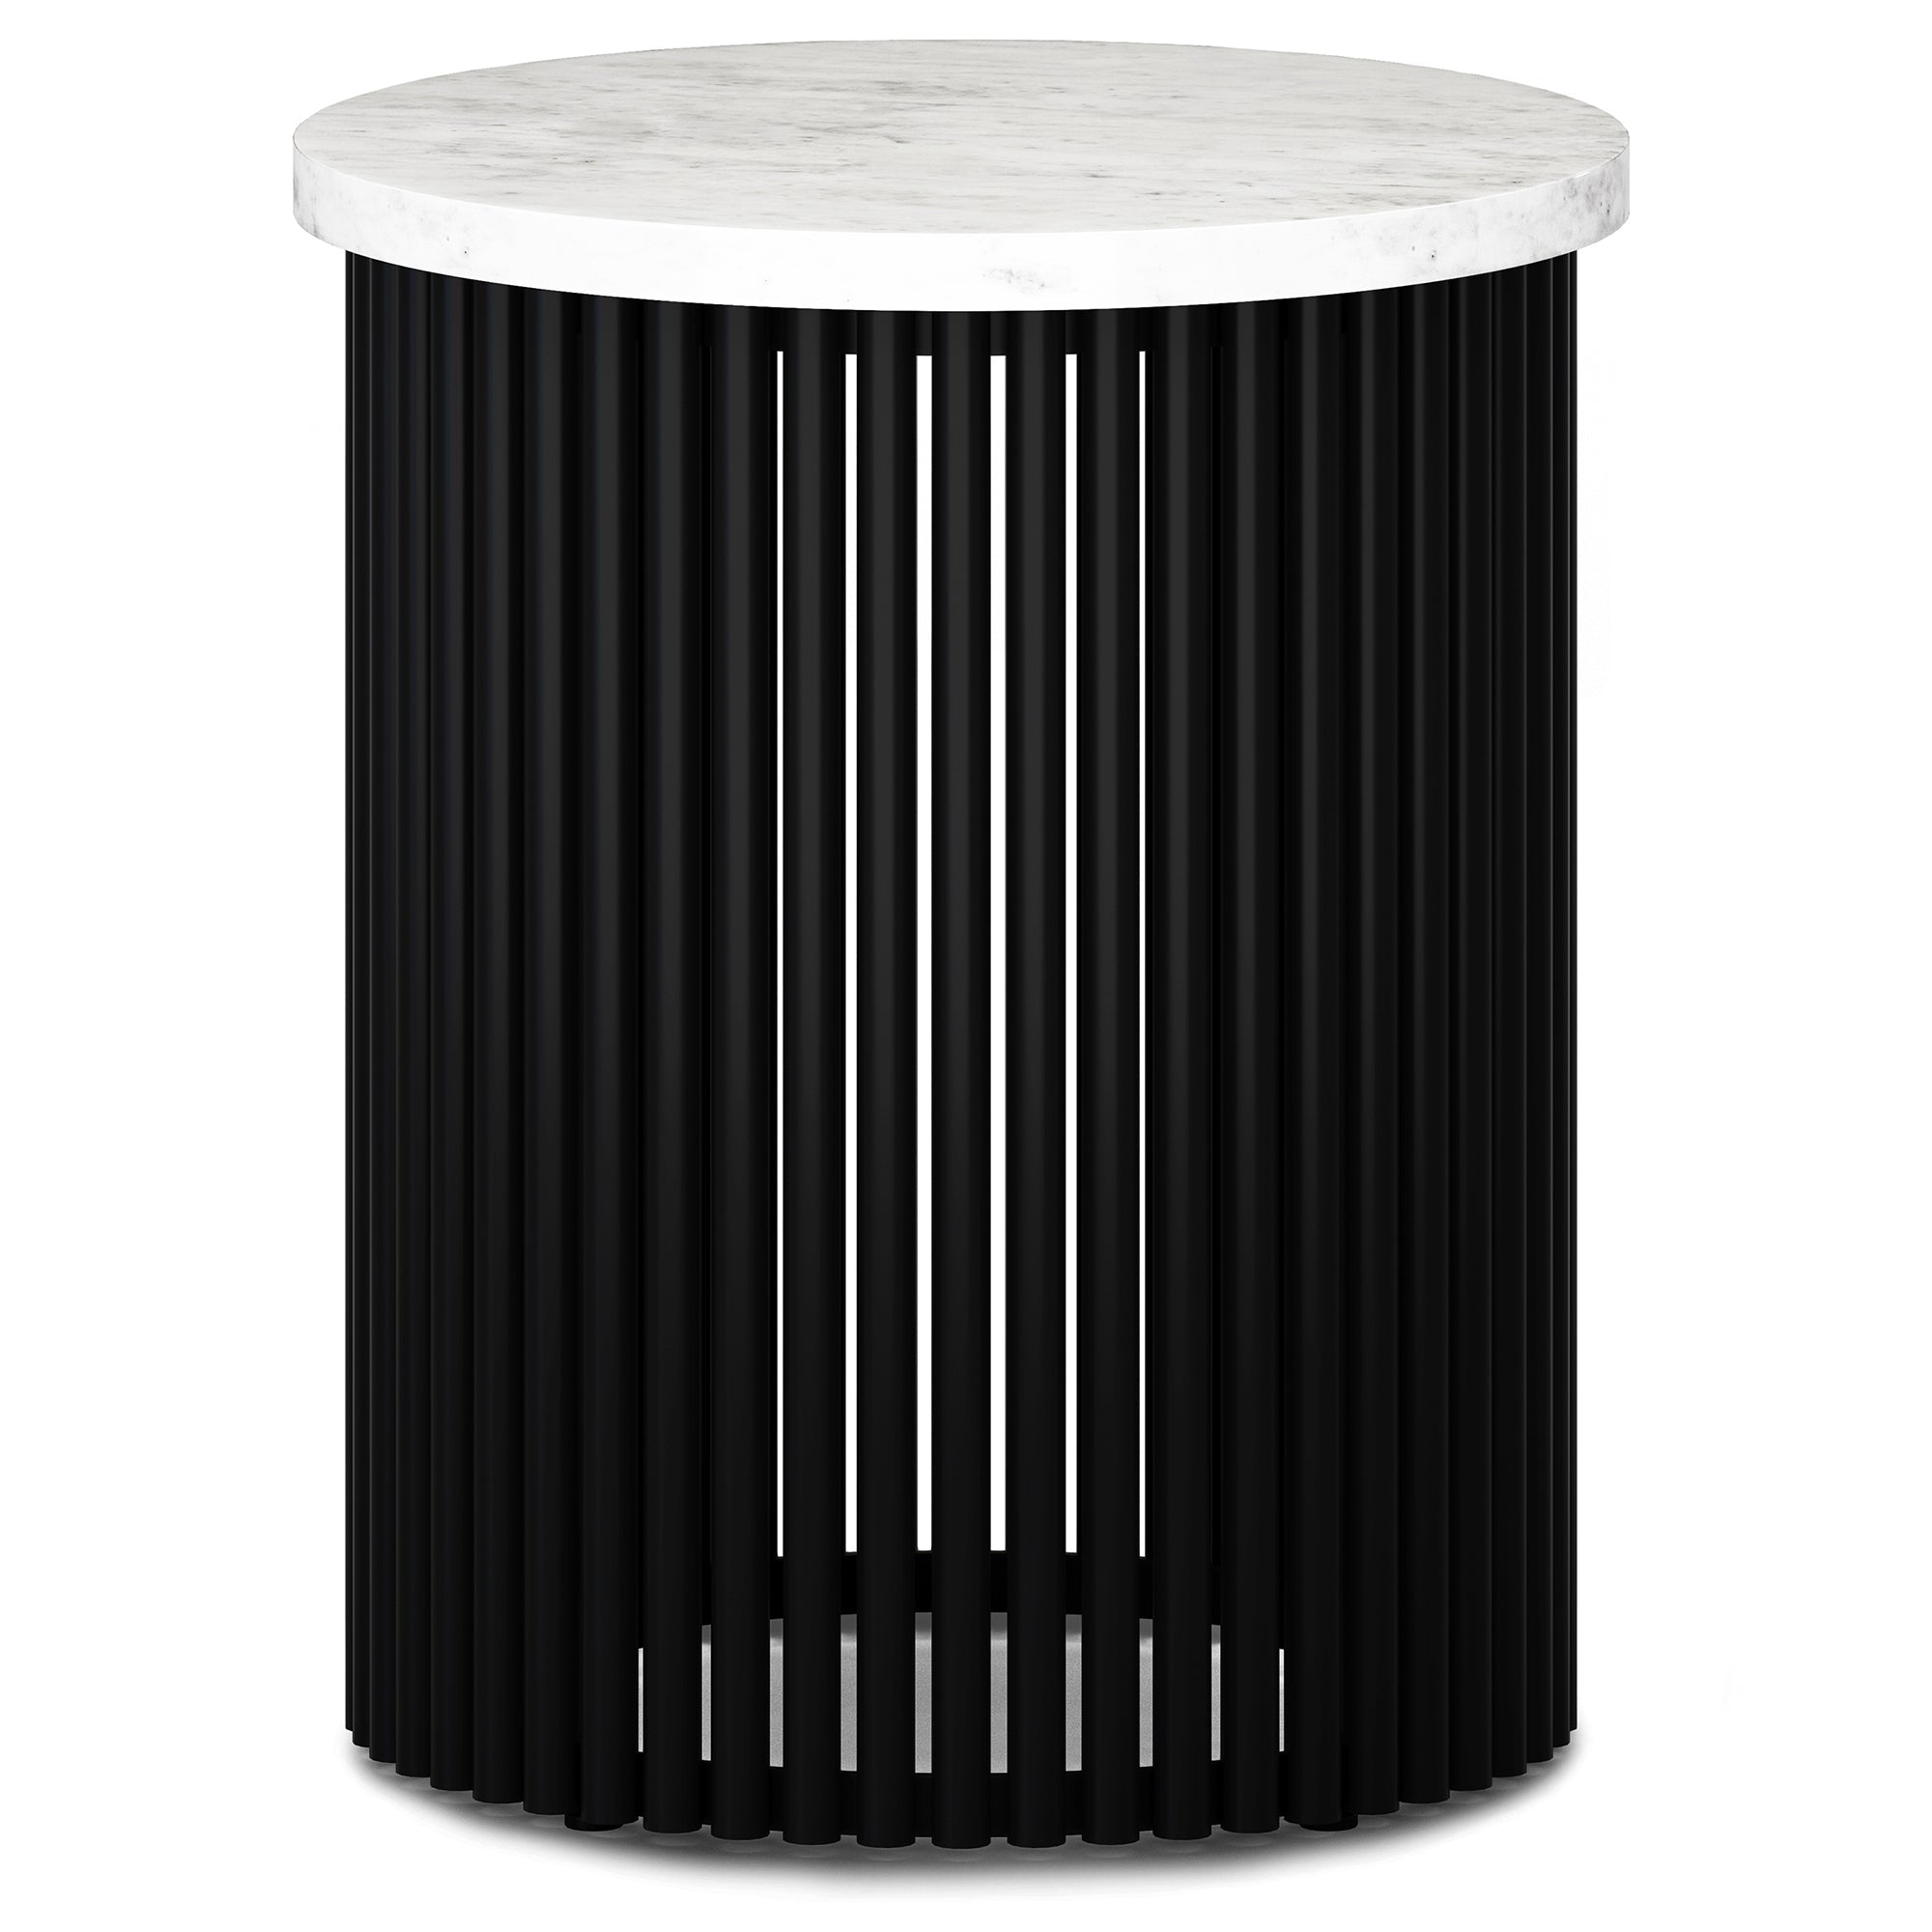 White Marble and Black Marble | Demy Metal and Wood Accent Table